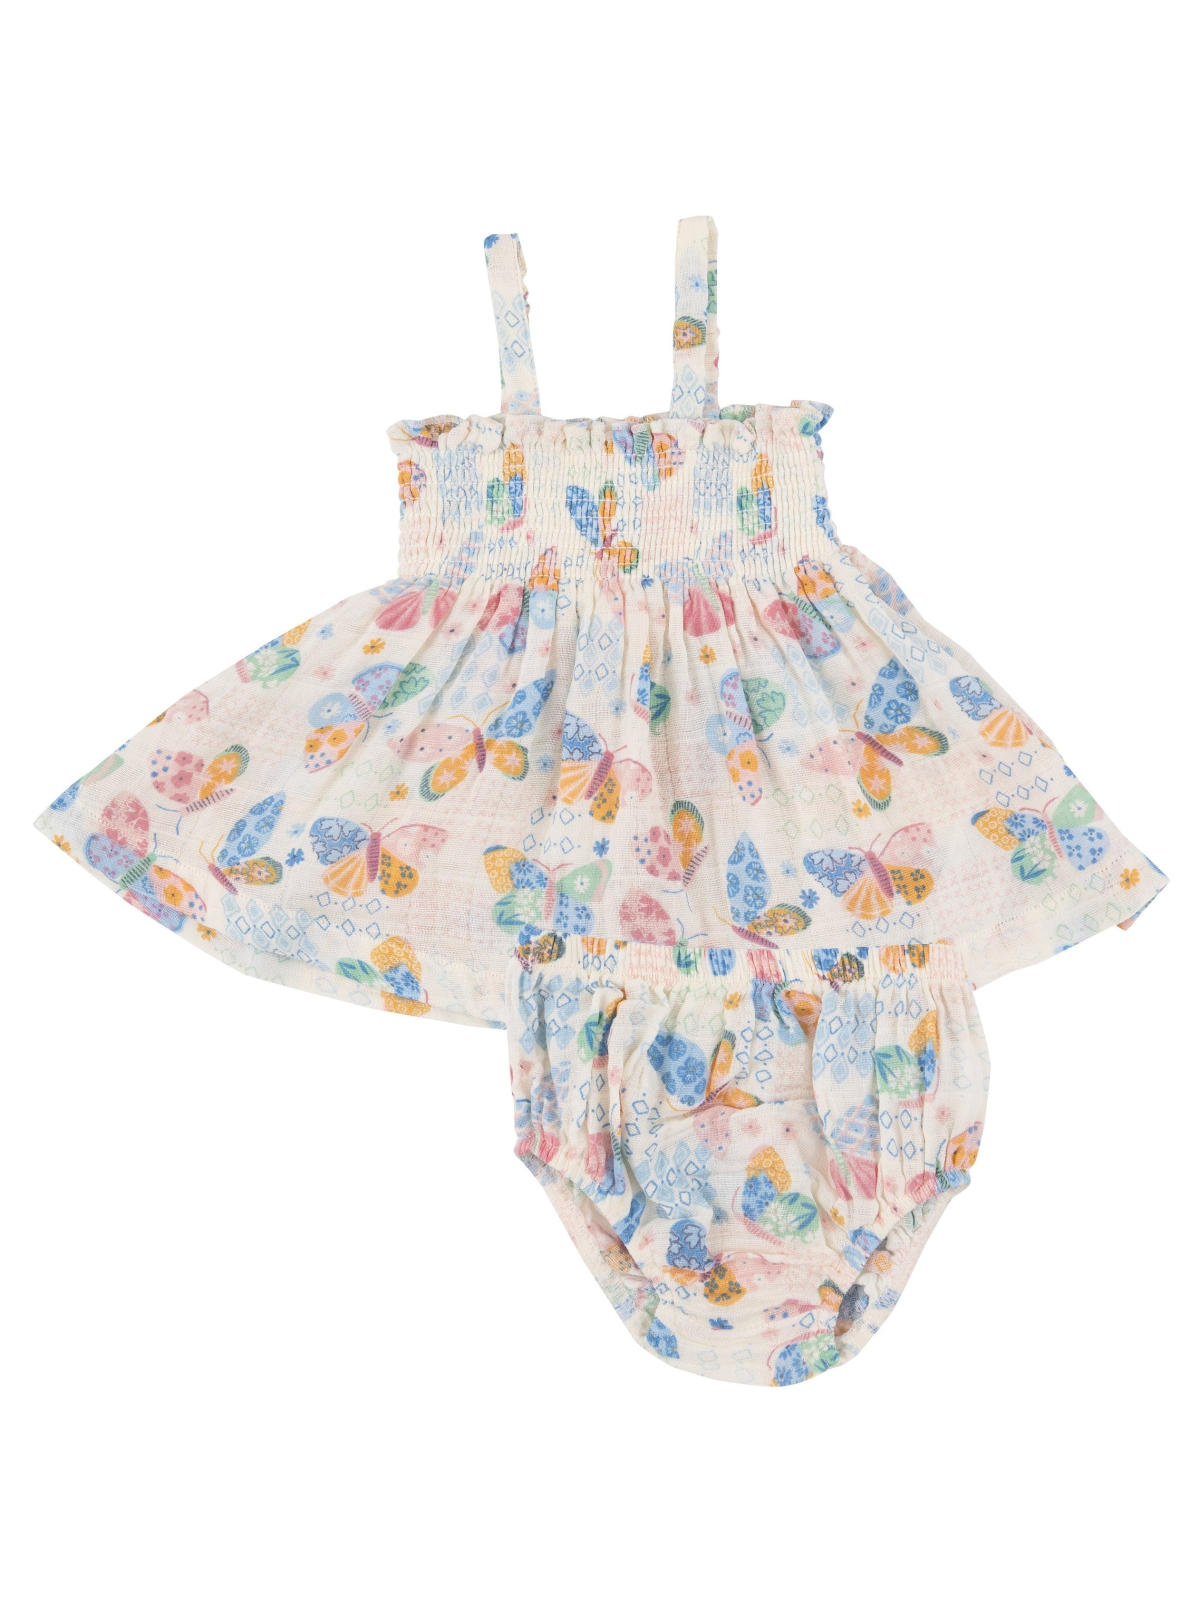 Smocked Top & Bloomer, Butterfly Patch